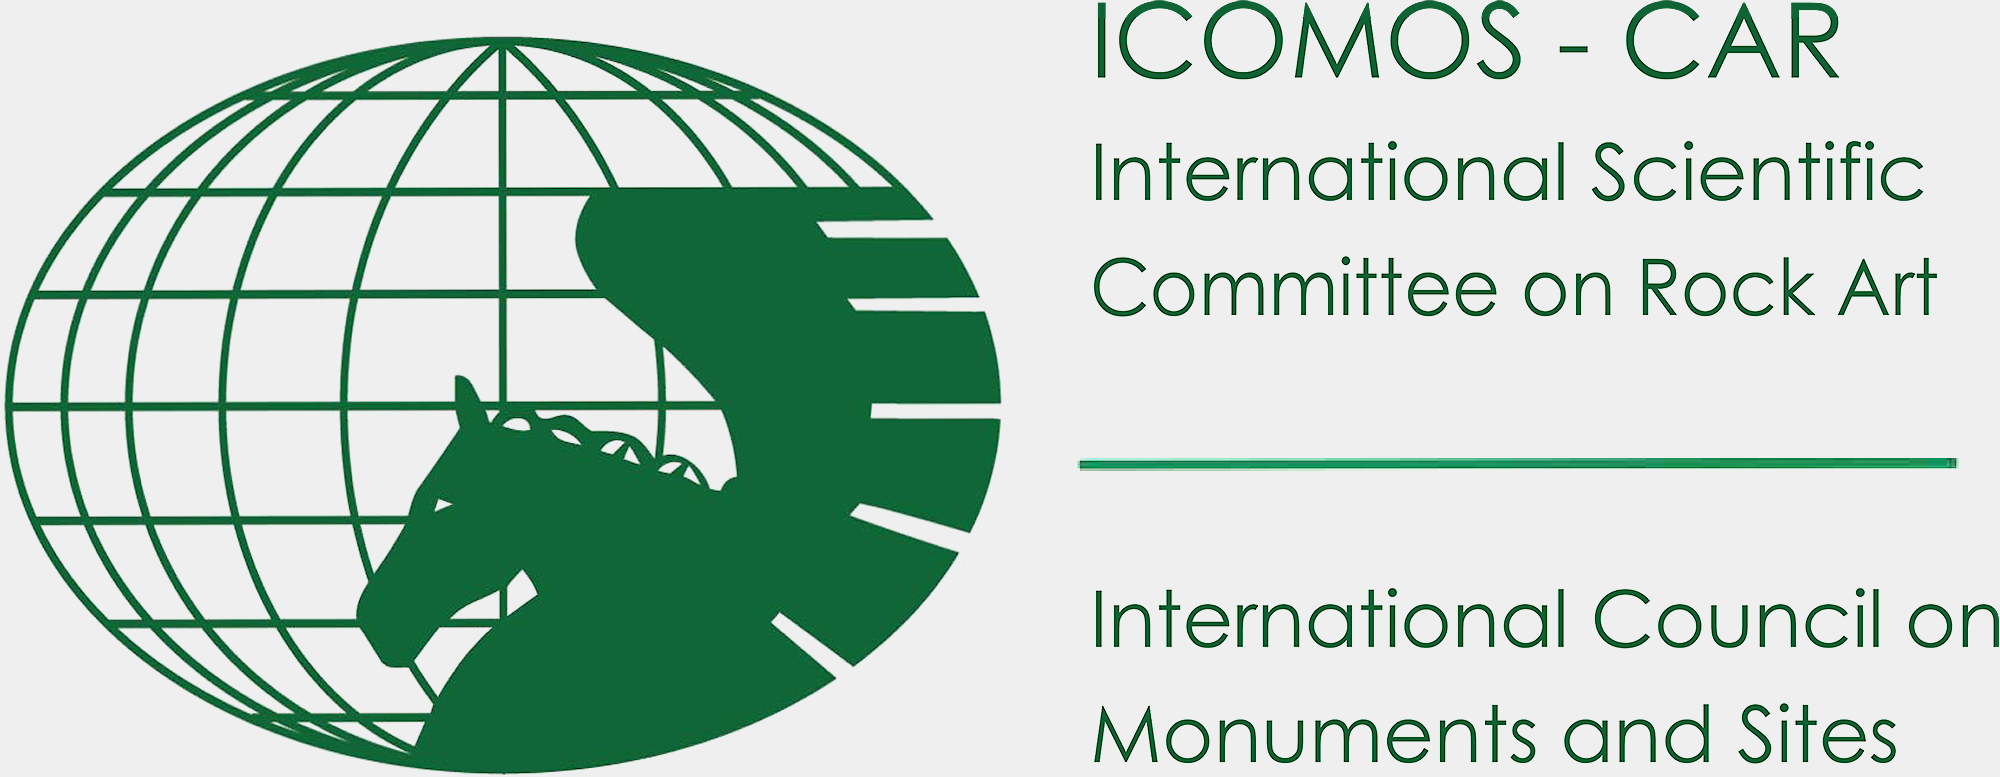 Vingen Norway ICOMOS - CAR International Scientific Committee on Rock Art International Council on Monuments and Sites